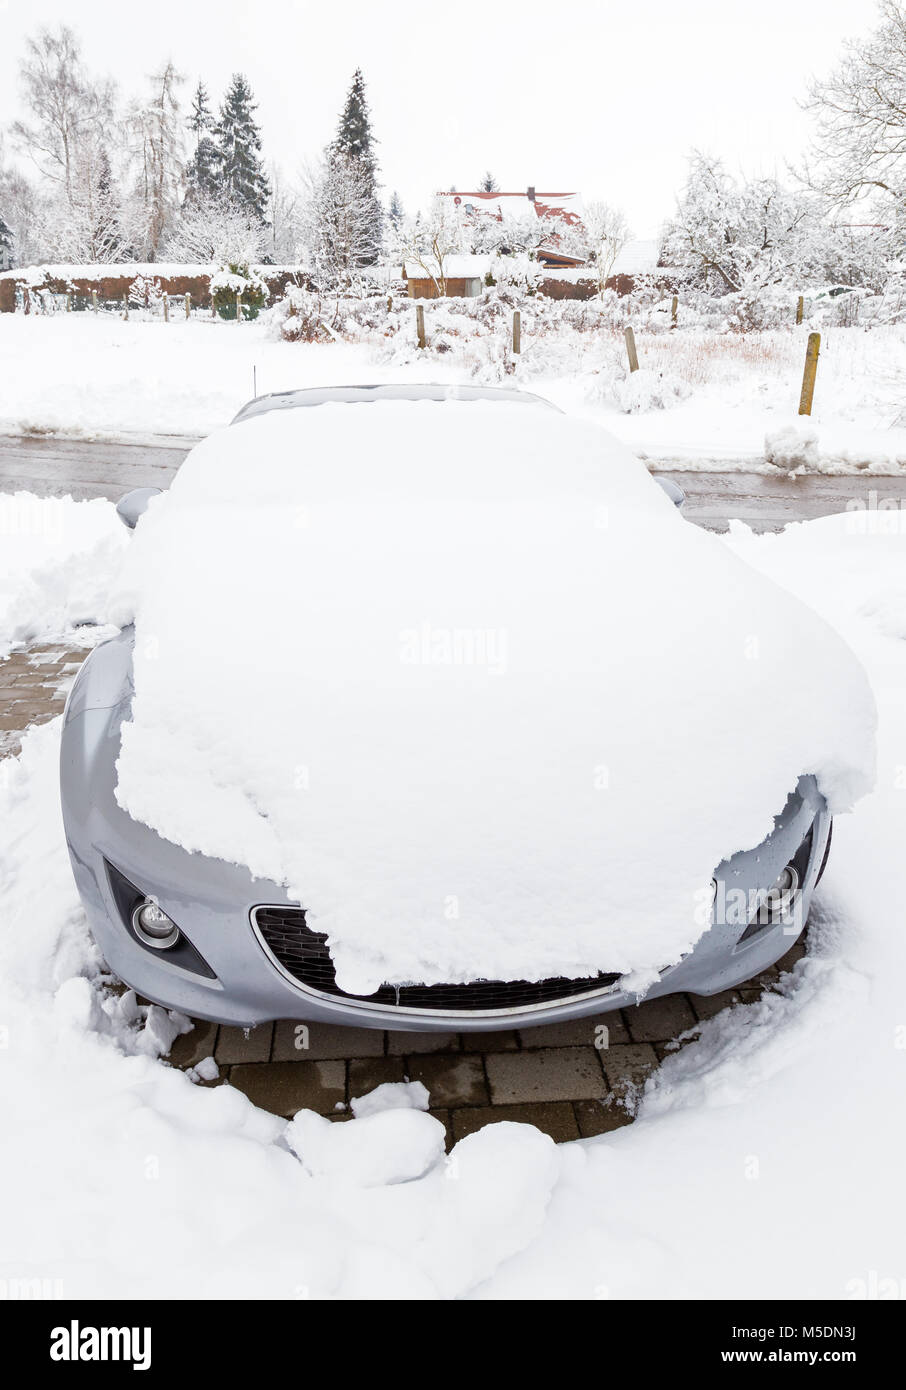 Snowed car on a parking lot Stock Photo